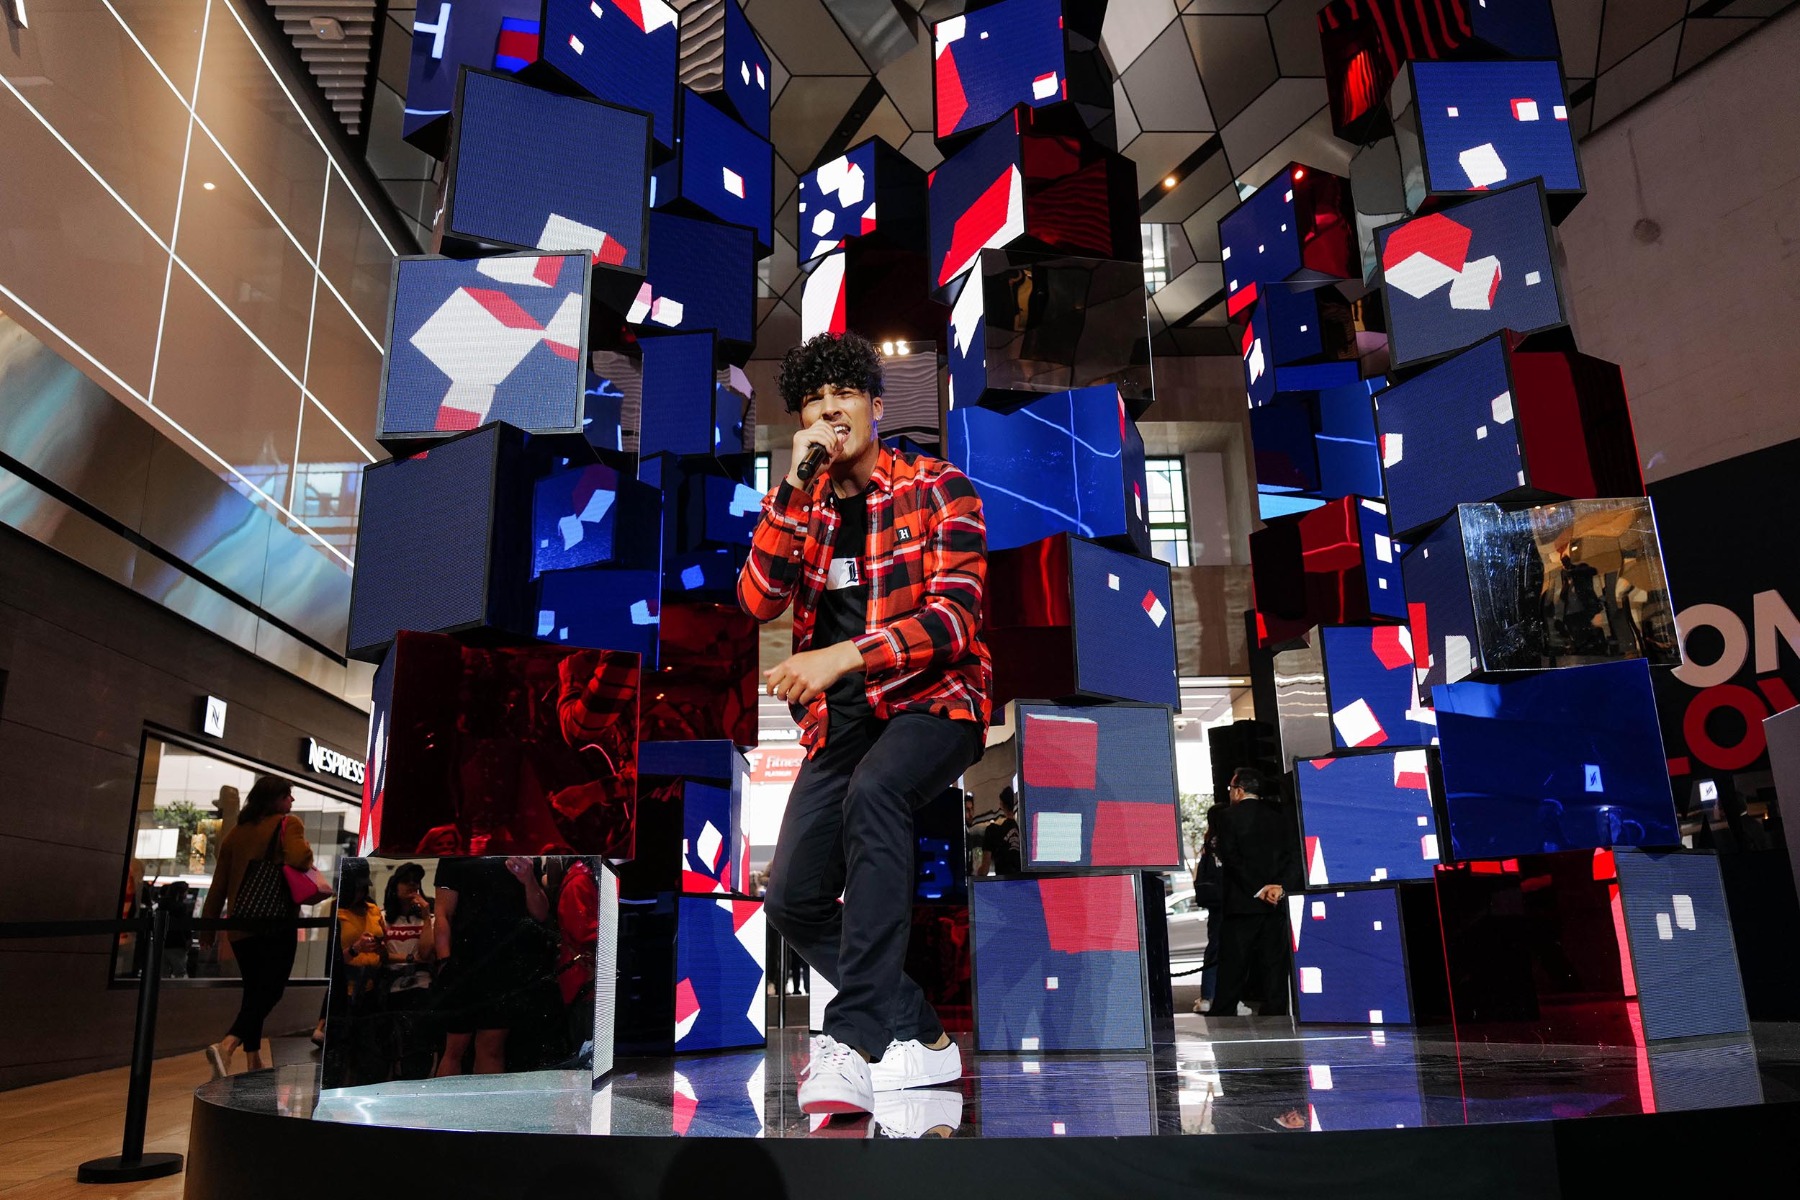 Tommy Hilfiger - What's On Melbourne